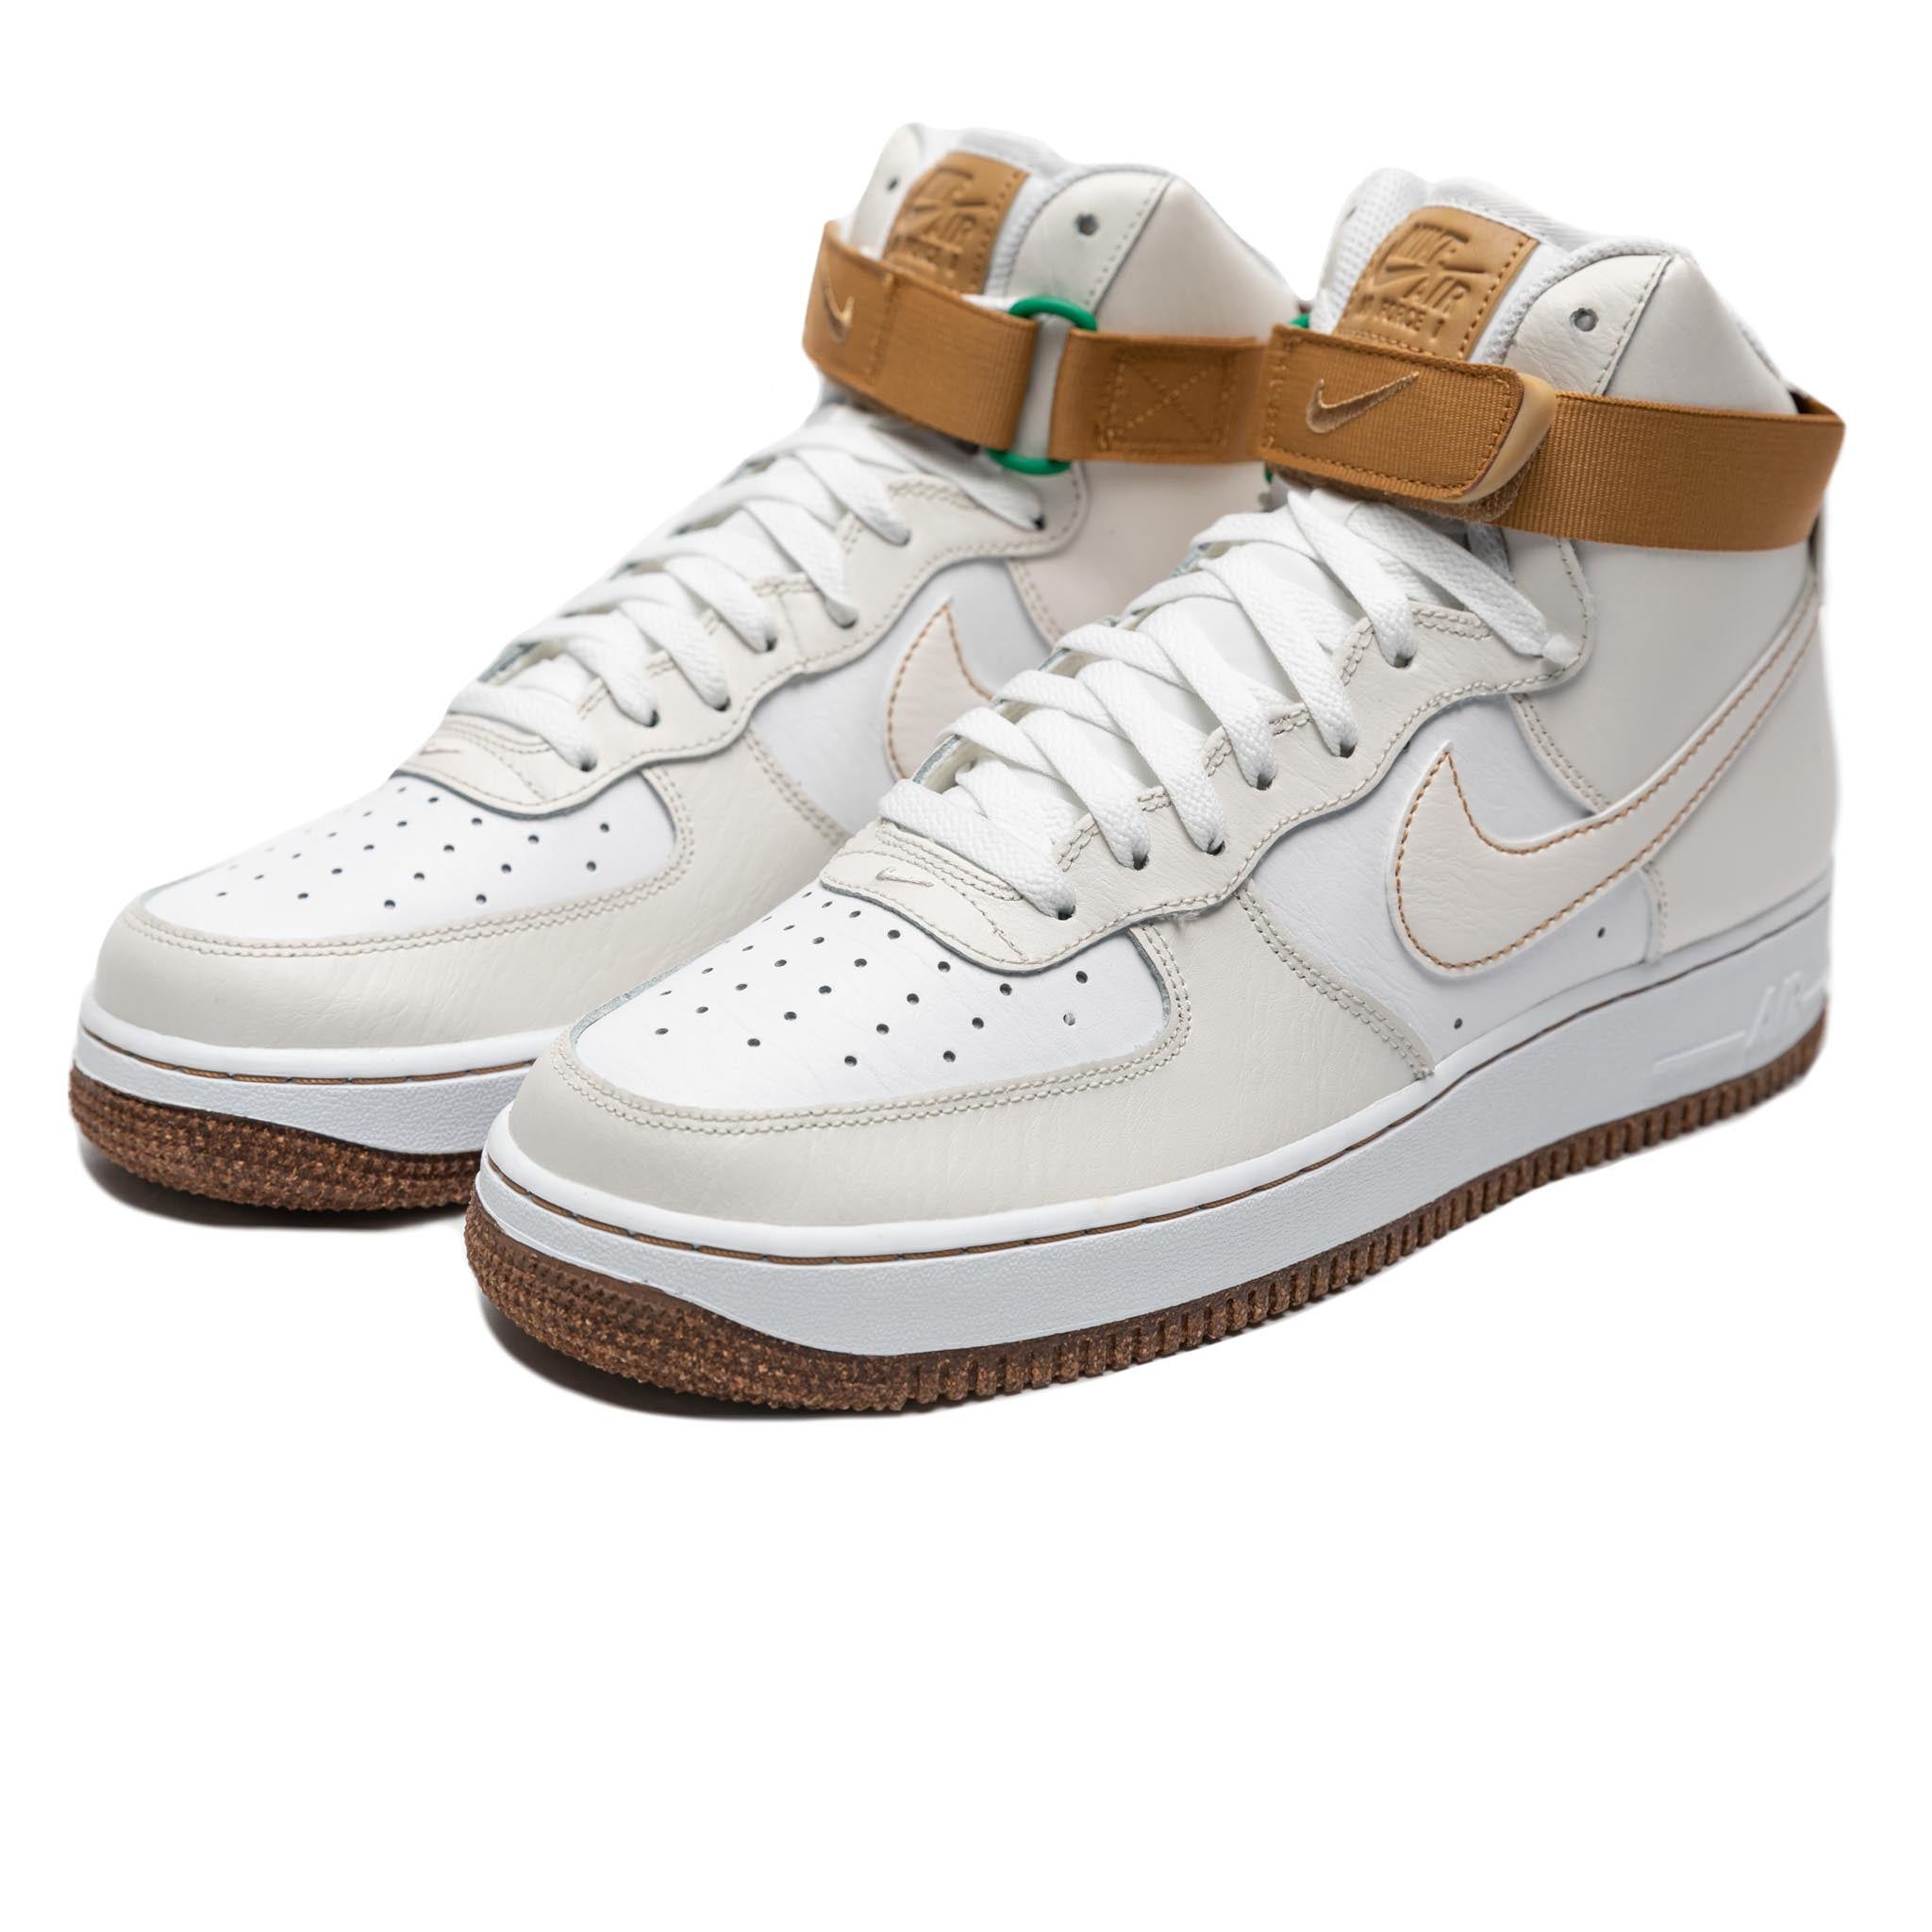 Nike's Air Force 1 High EMB Phantom Elemental Gold Is Inspired By Quality  Control - Sneaker News